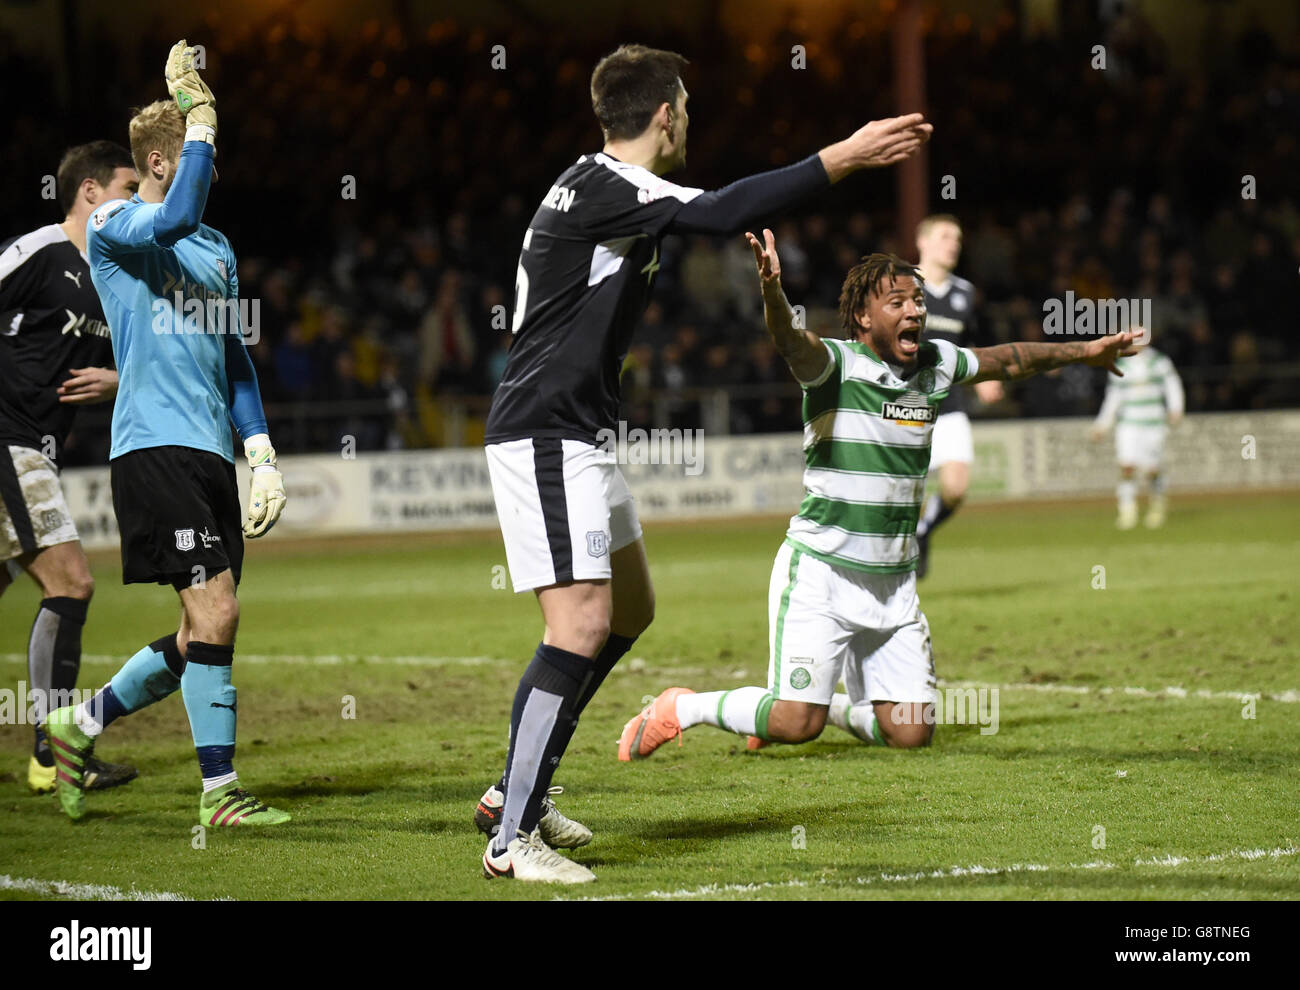 Celtic's Colin Kazim-Richards appeals for a penalty after being brought down by Dundee's Darren O'Dea during the Ladbrokes Scottish Premiership match at Dens Park, Dundee. Stock Photo